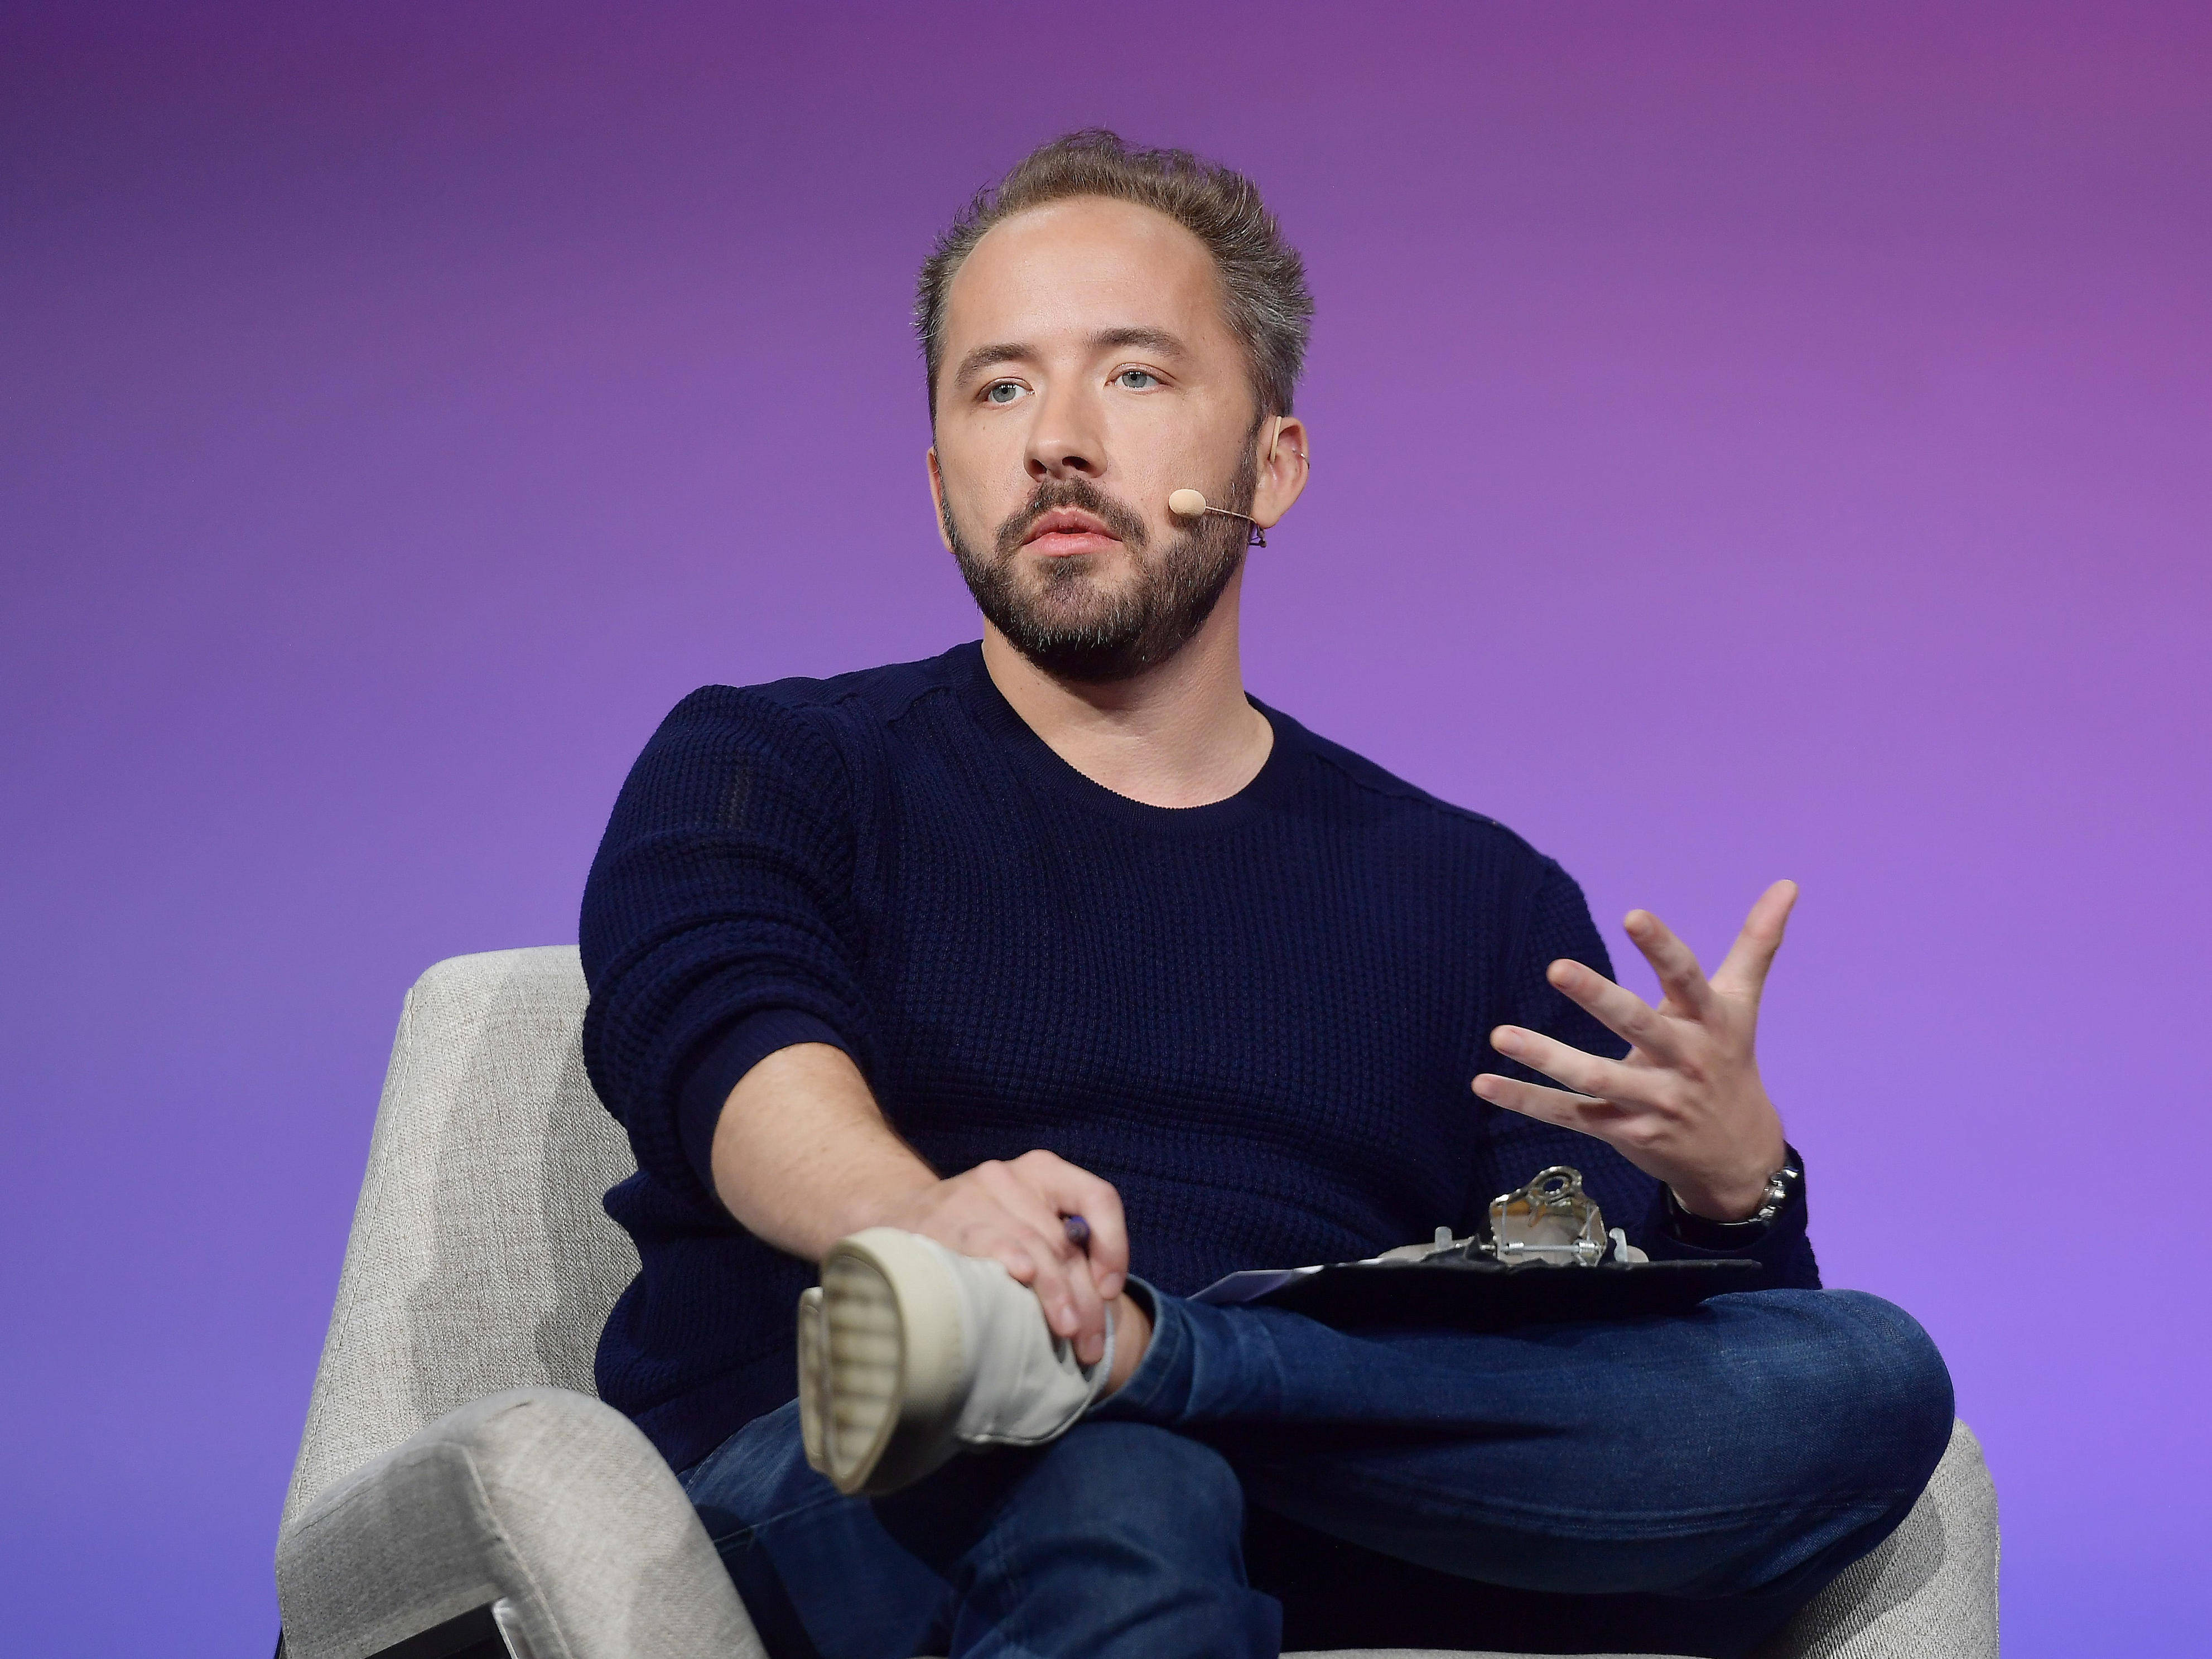 <p>Cloud storage firm Dropbox <a href="https://blog.dropbox.com/topics/company/a-message-from-drew" rel="noopener">said</a> Thursday that it would be reducing its global workforce by 16%, or 500 jobs.</p><p>In a message to staff sent Thursday, CEO Drew Houston said the cuts are being made, in part, from slowing business growth and the expansion of AI products. </p><p>"Today's changes were the result of taking a hard look at our strategic priorities and organizational structure as a leadership team, and aligning to principles of sustainable financial growth, efficiency, and flexibility to invest in our future. We're also streamlining how the company is organized," Houston said. </p>